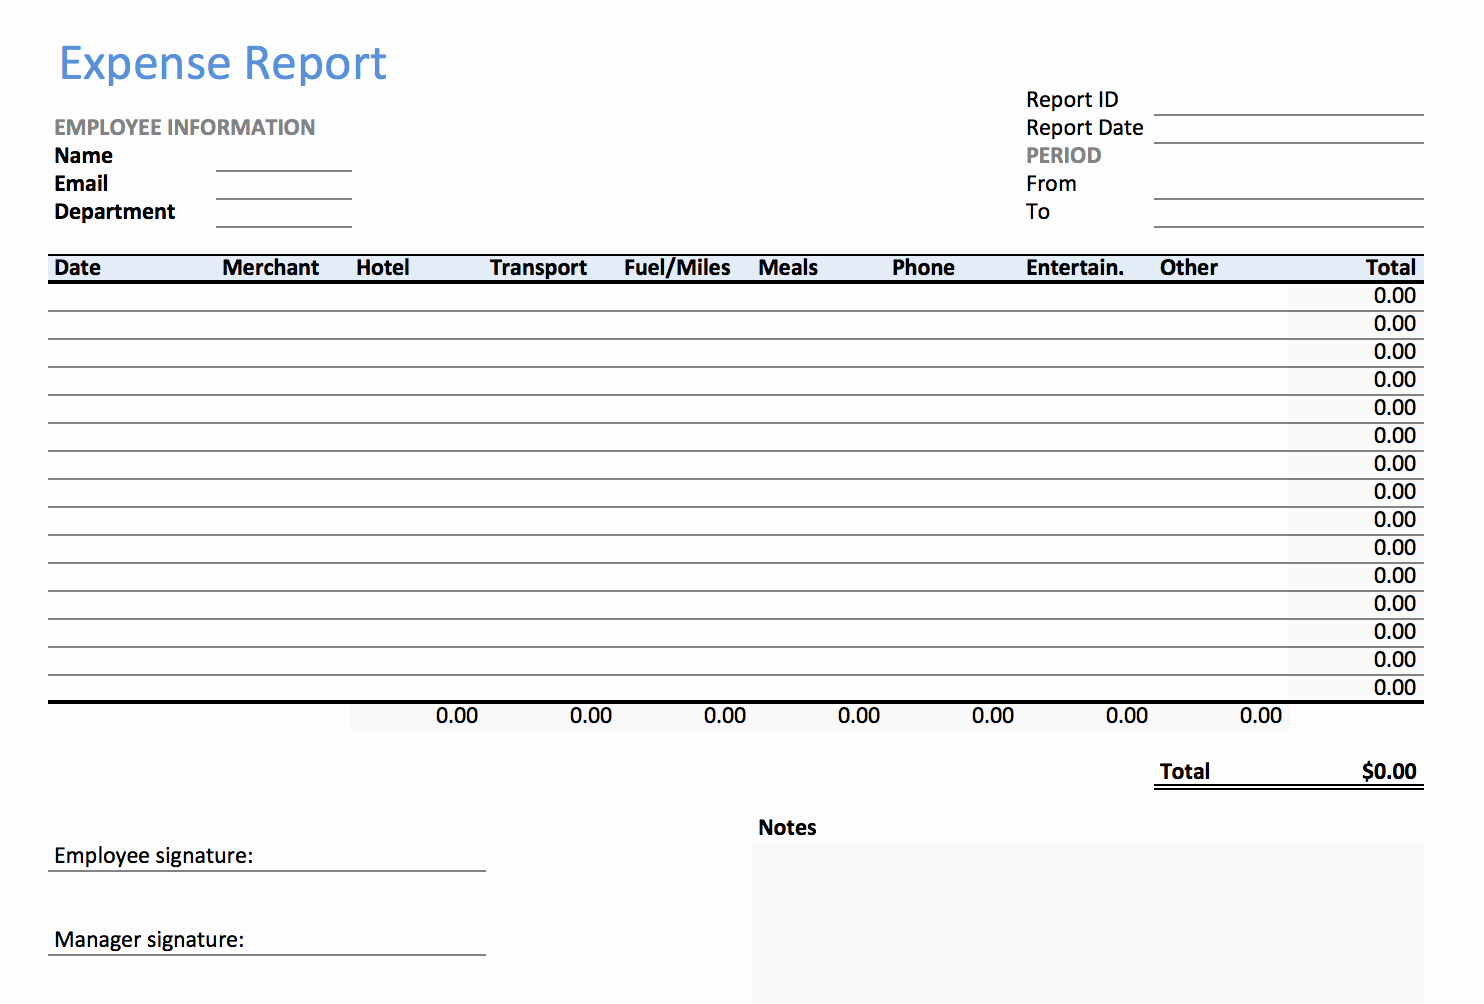 Basic Expense Report Template Lovely Excel Expense Report Template Keepek